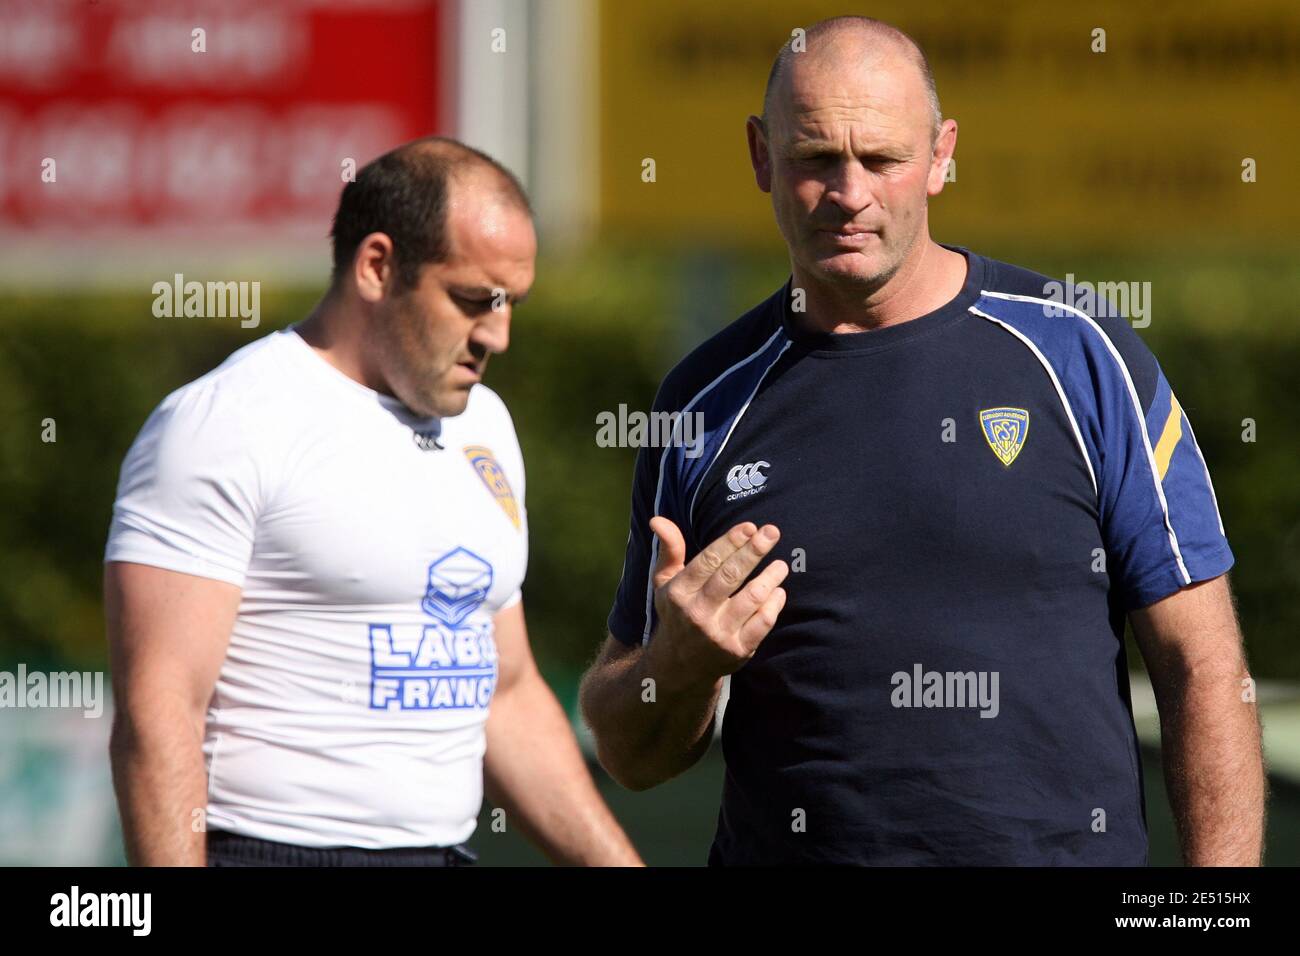 Clermont's coach Vern Cotter during the French Top 14 rugby union match, FC  Auch Gers vs ASM-Clermont-Auvergne at the Jacques Fouroux stadium in Auch,  France on April 26, 2008. Clermont won 36-13.